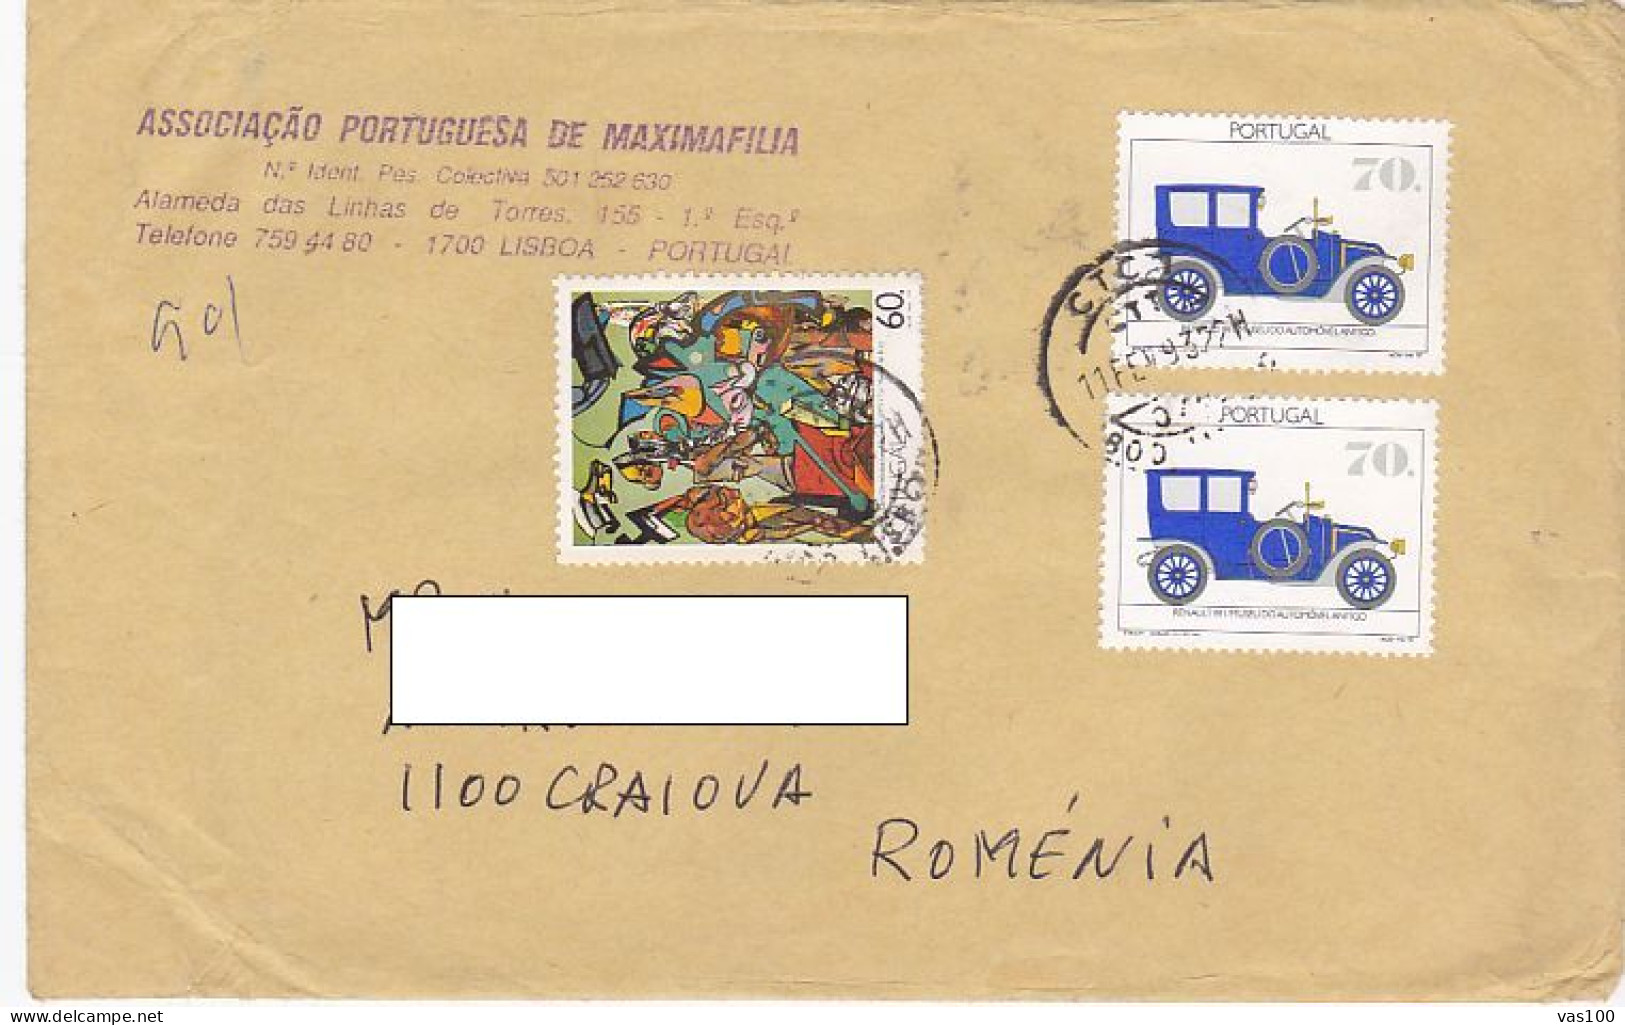 PAINTINGS, RENAULT 1911 CAR, STAMPS ON COVER, 1993, PORTUGAL - Covers & Documents